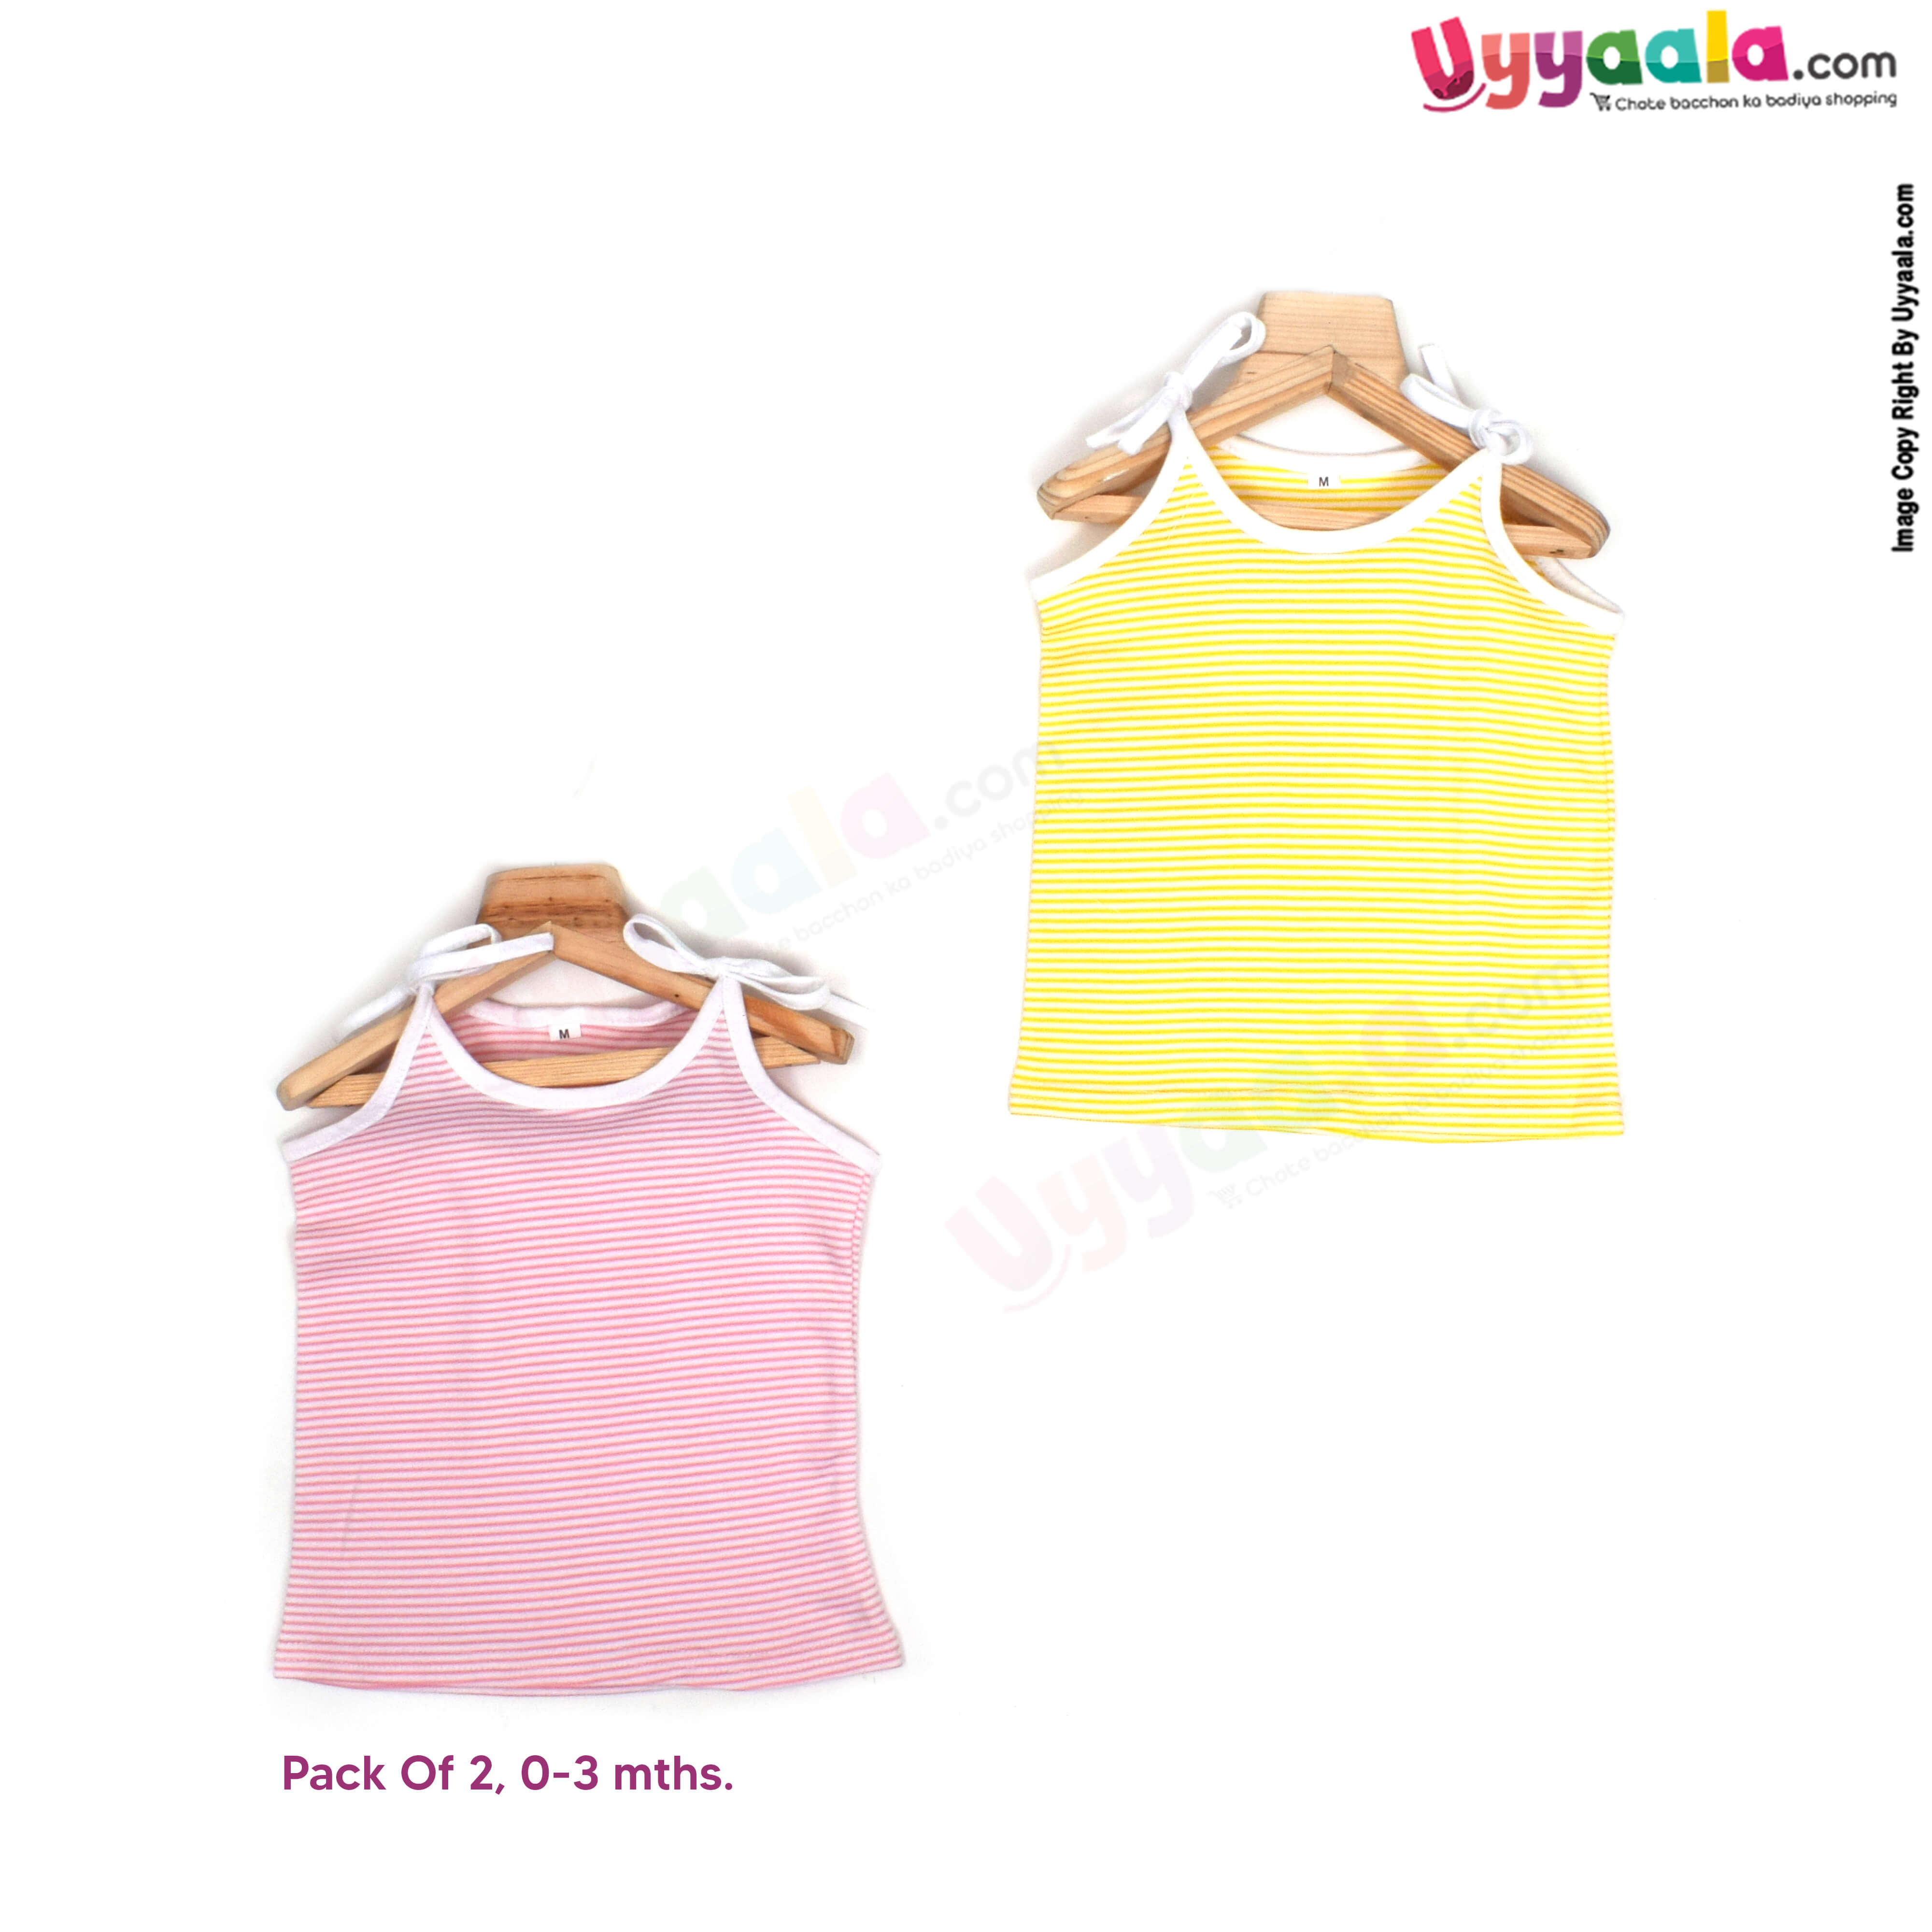 SNUG UP Sleeveless Baby Jabla Set, Top Opening Tie knot Lace Model, Premium Quality Cotton Baby Wear, Stripes Print, (0-3M), 2Pack - Pink & Yellow